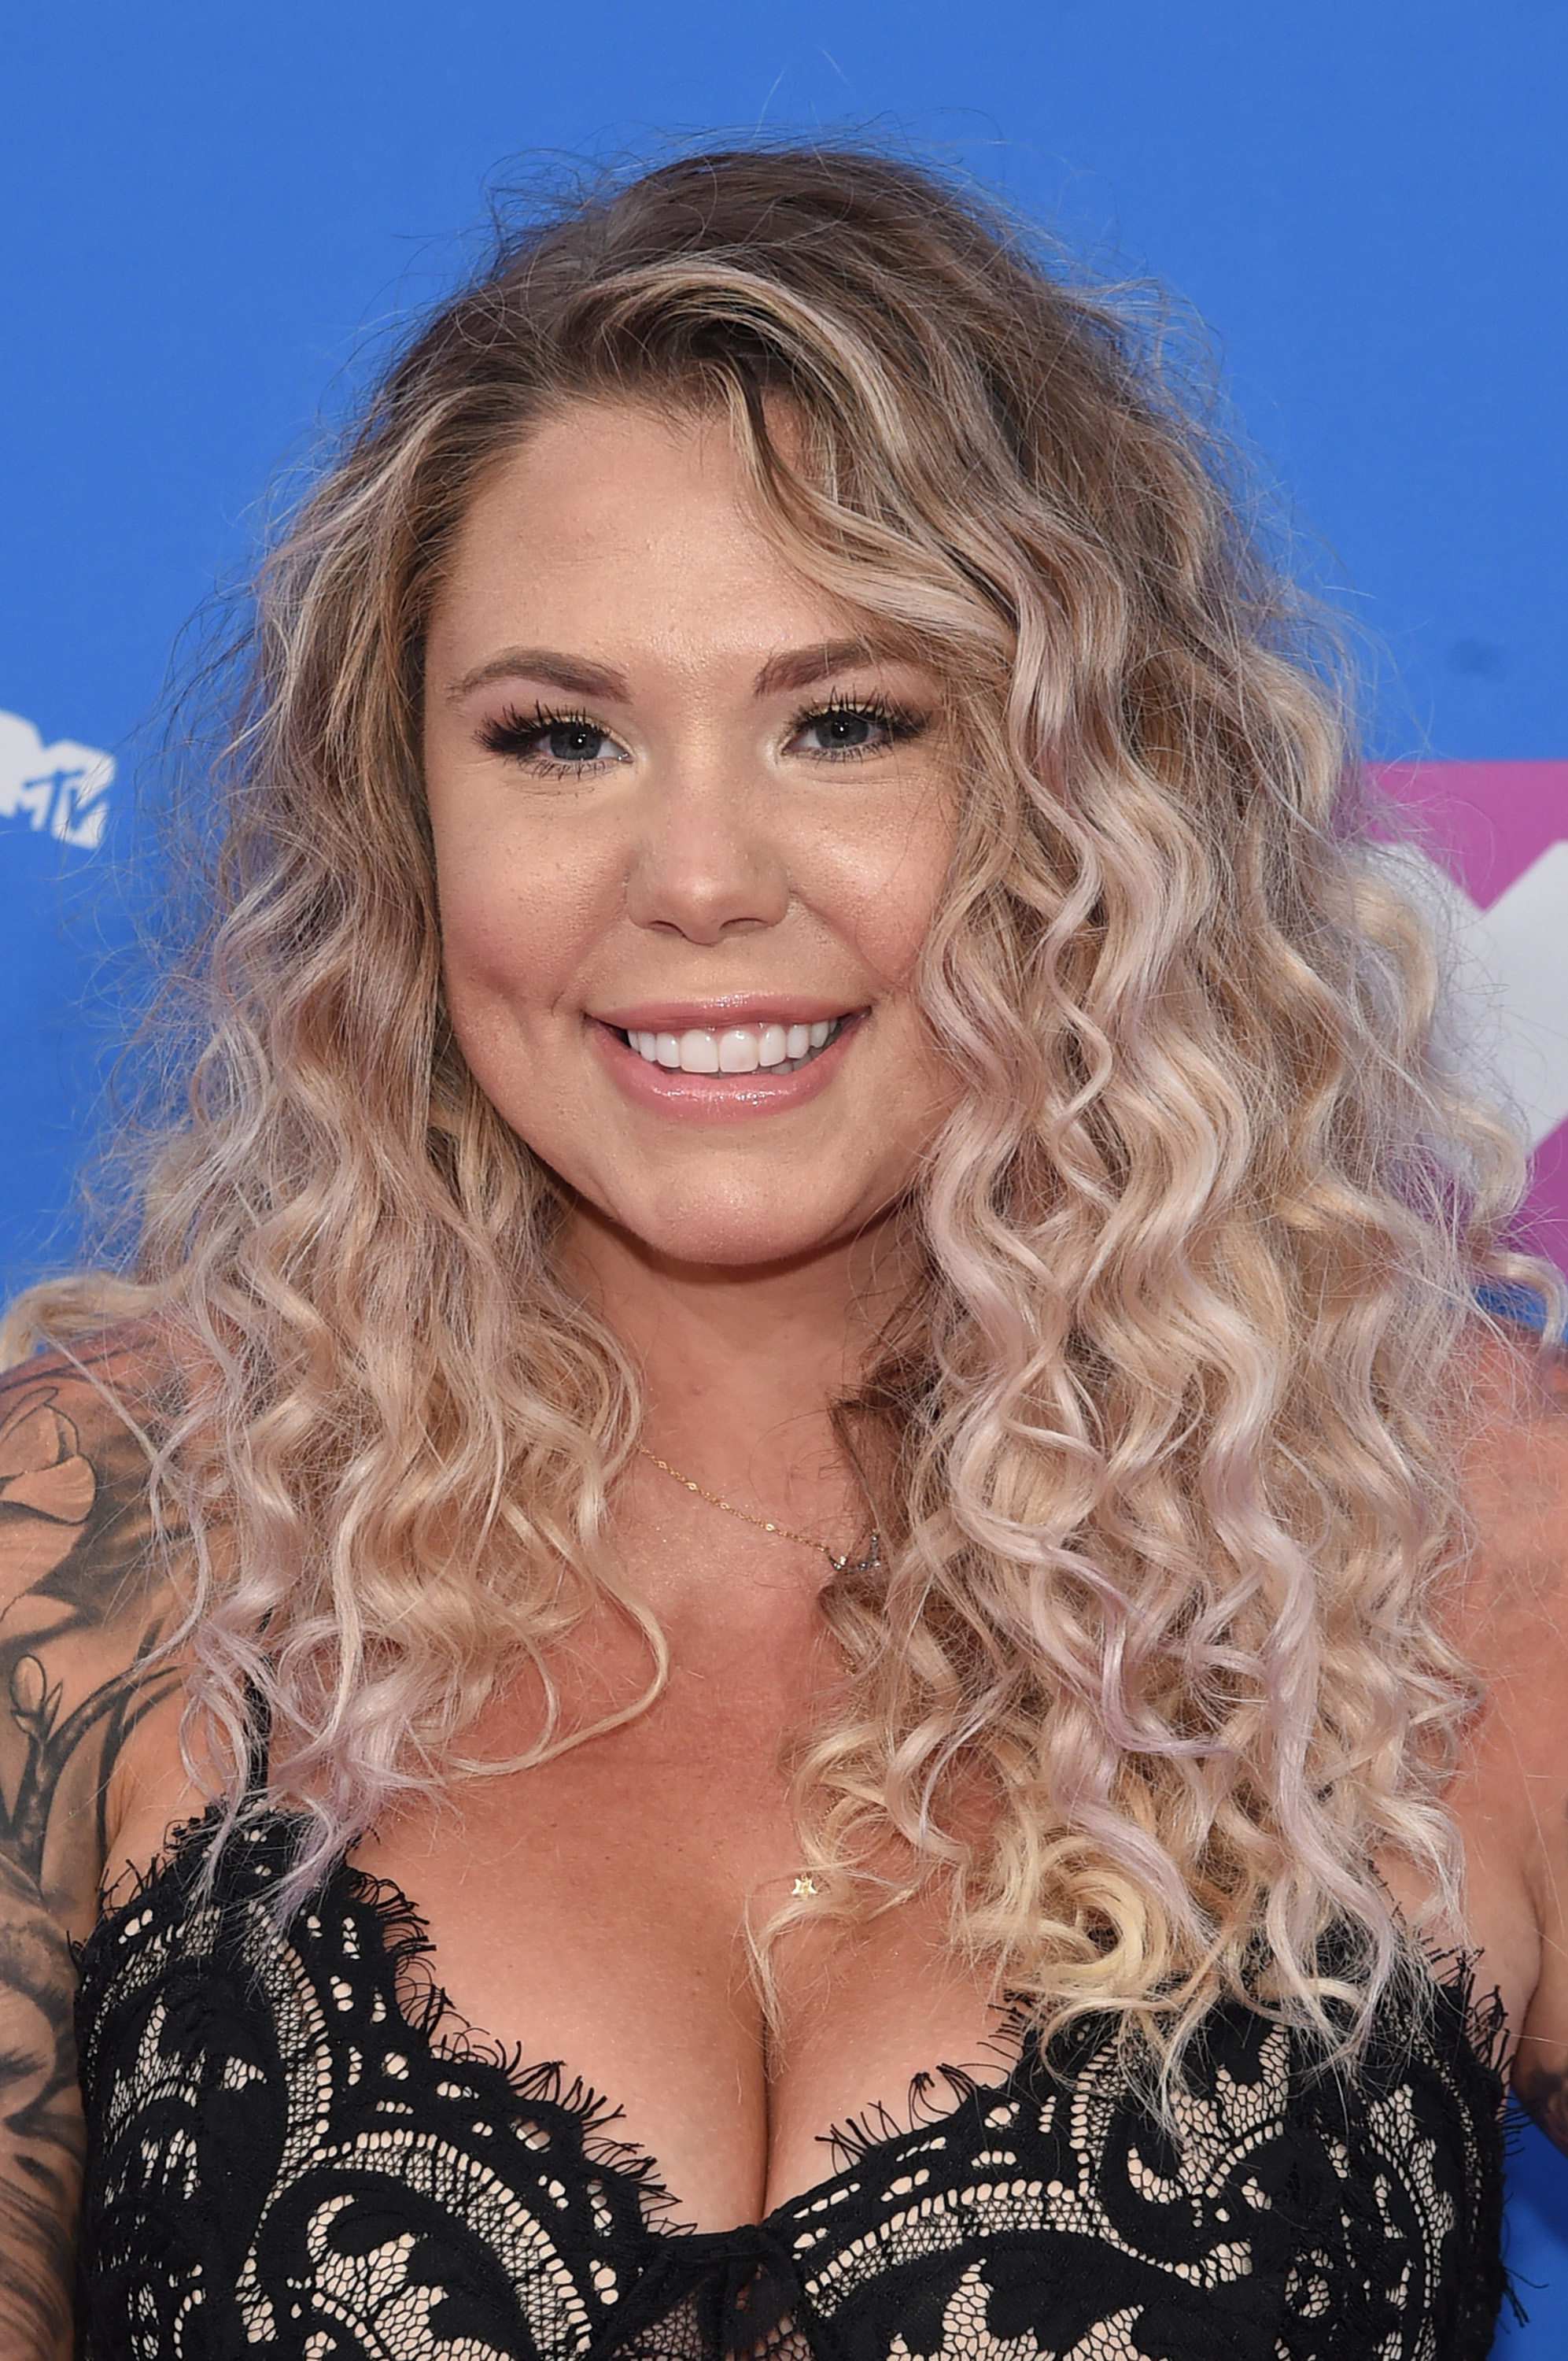 Kailyn Lowry at the 2018 MTV Video Music Awards